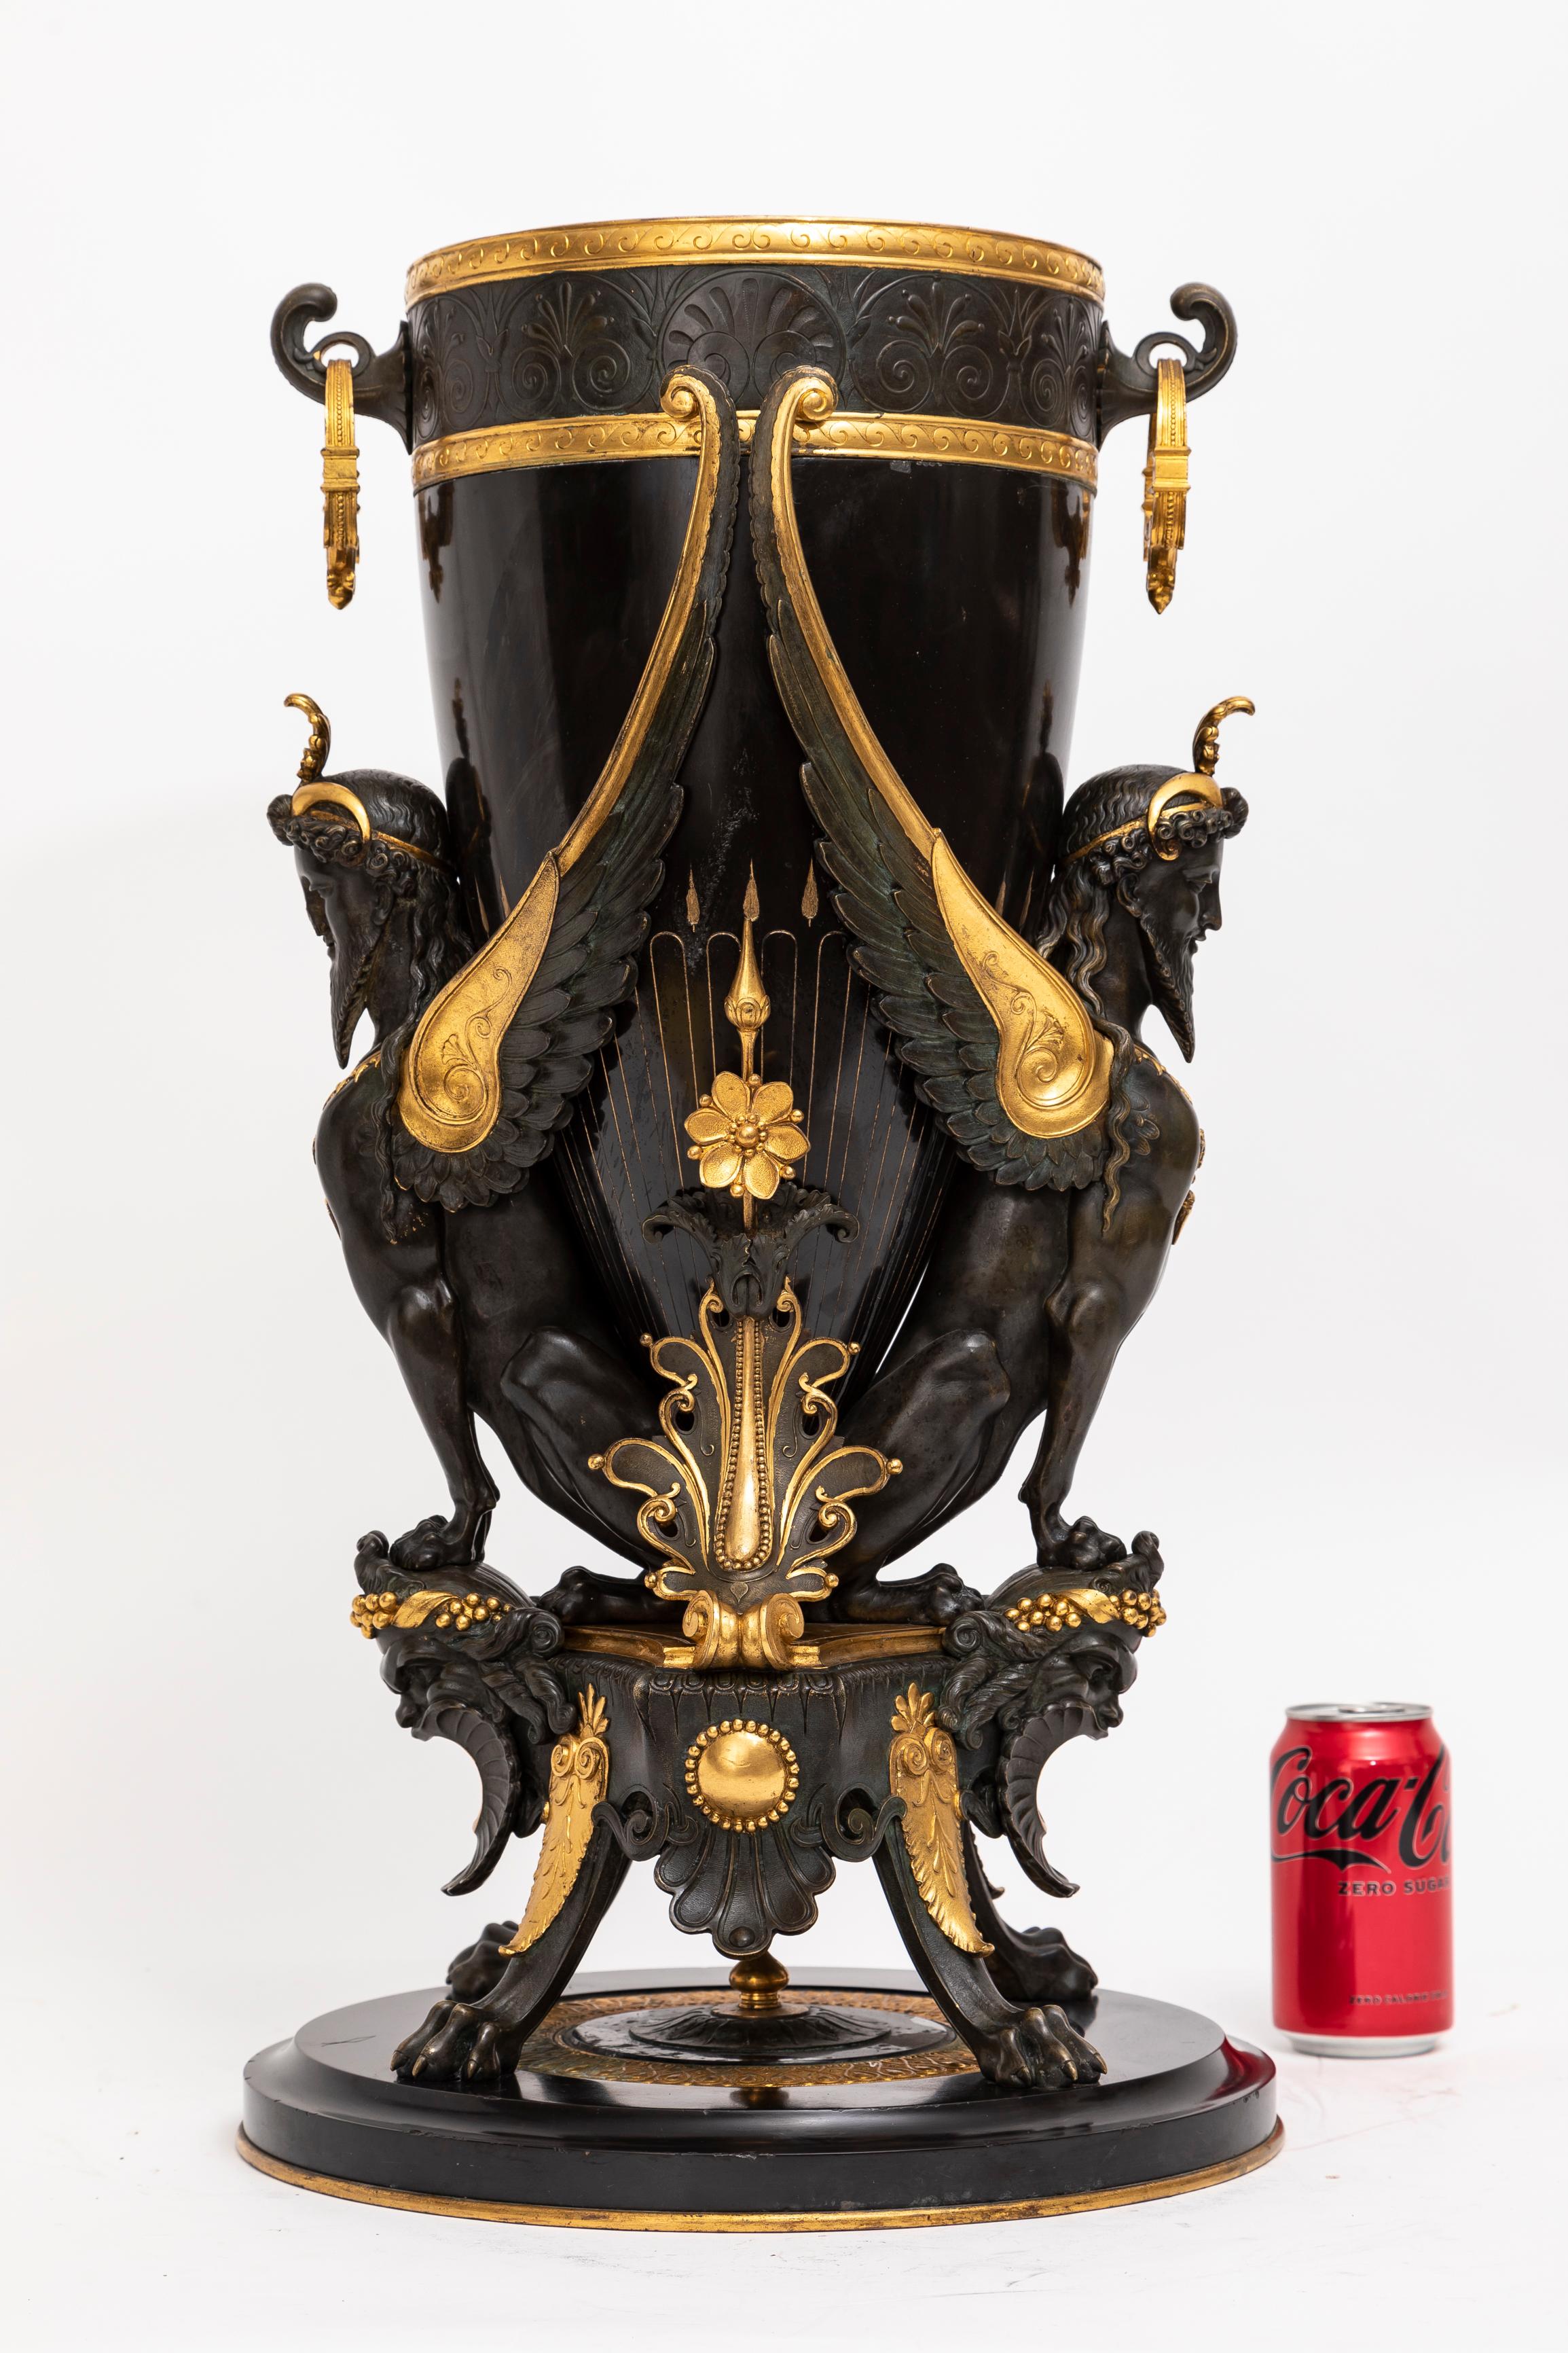 A Large 19th Century French Black Marble, Patinated, and Gilt-Bronze Vase Attributed to Charpentier & Cie.  This remarkable vase is attributed to the workshop of Charpentier & Cie., and stands as an exquisite fusion of sumptuous black marble,